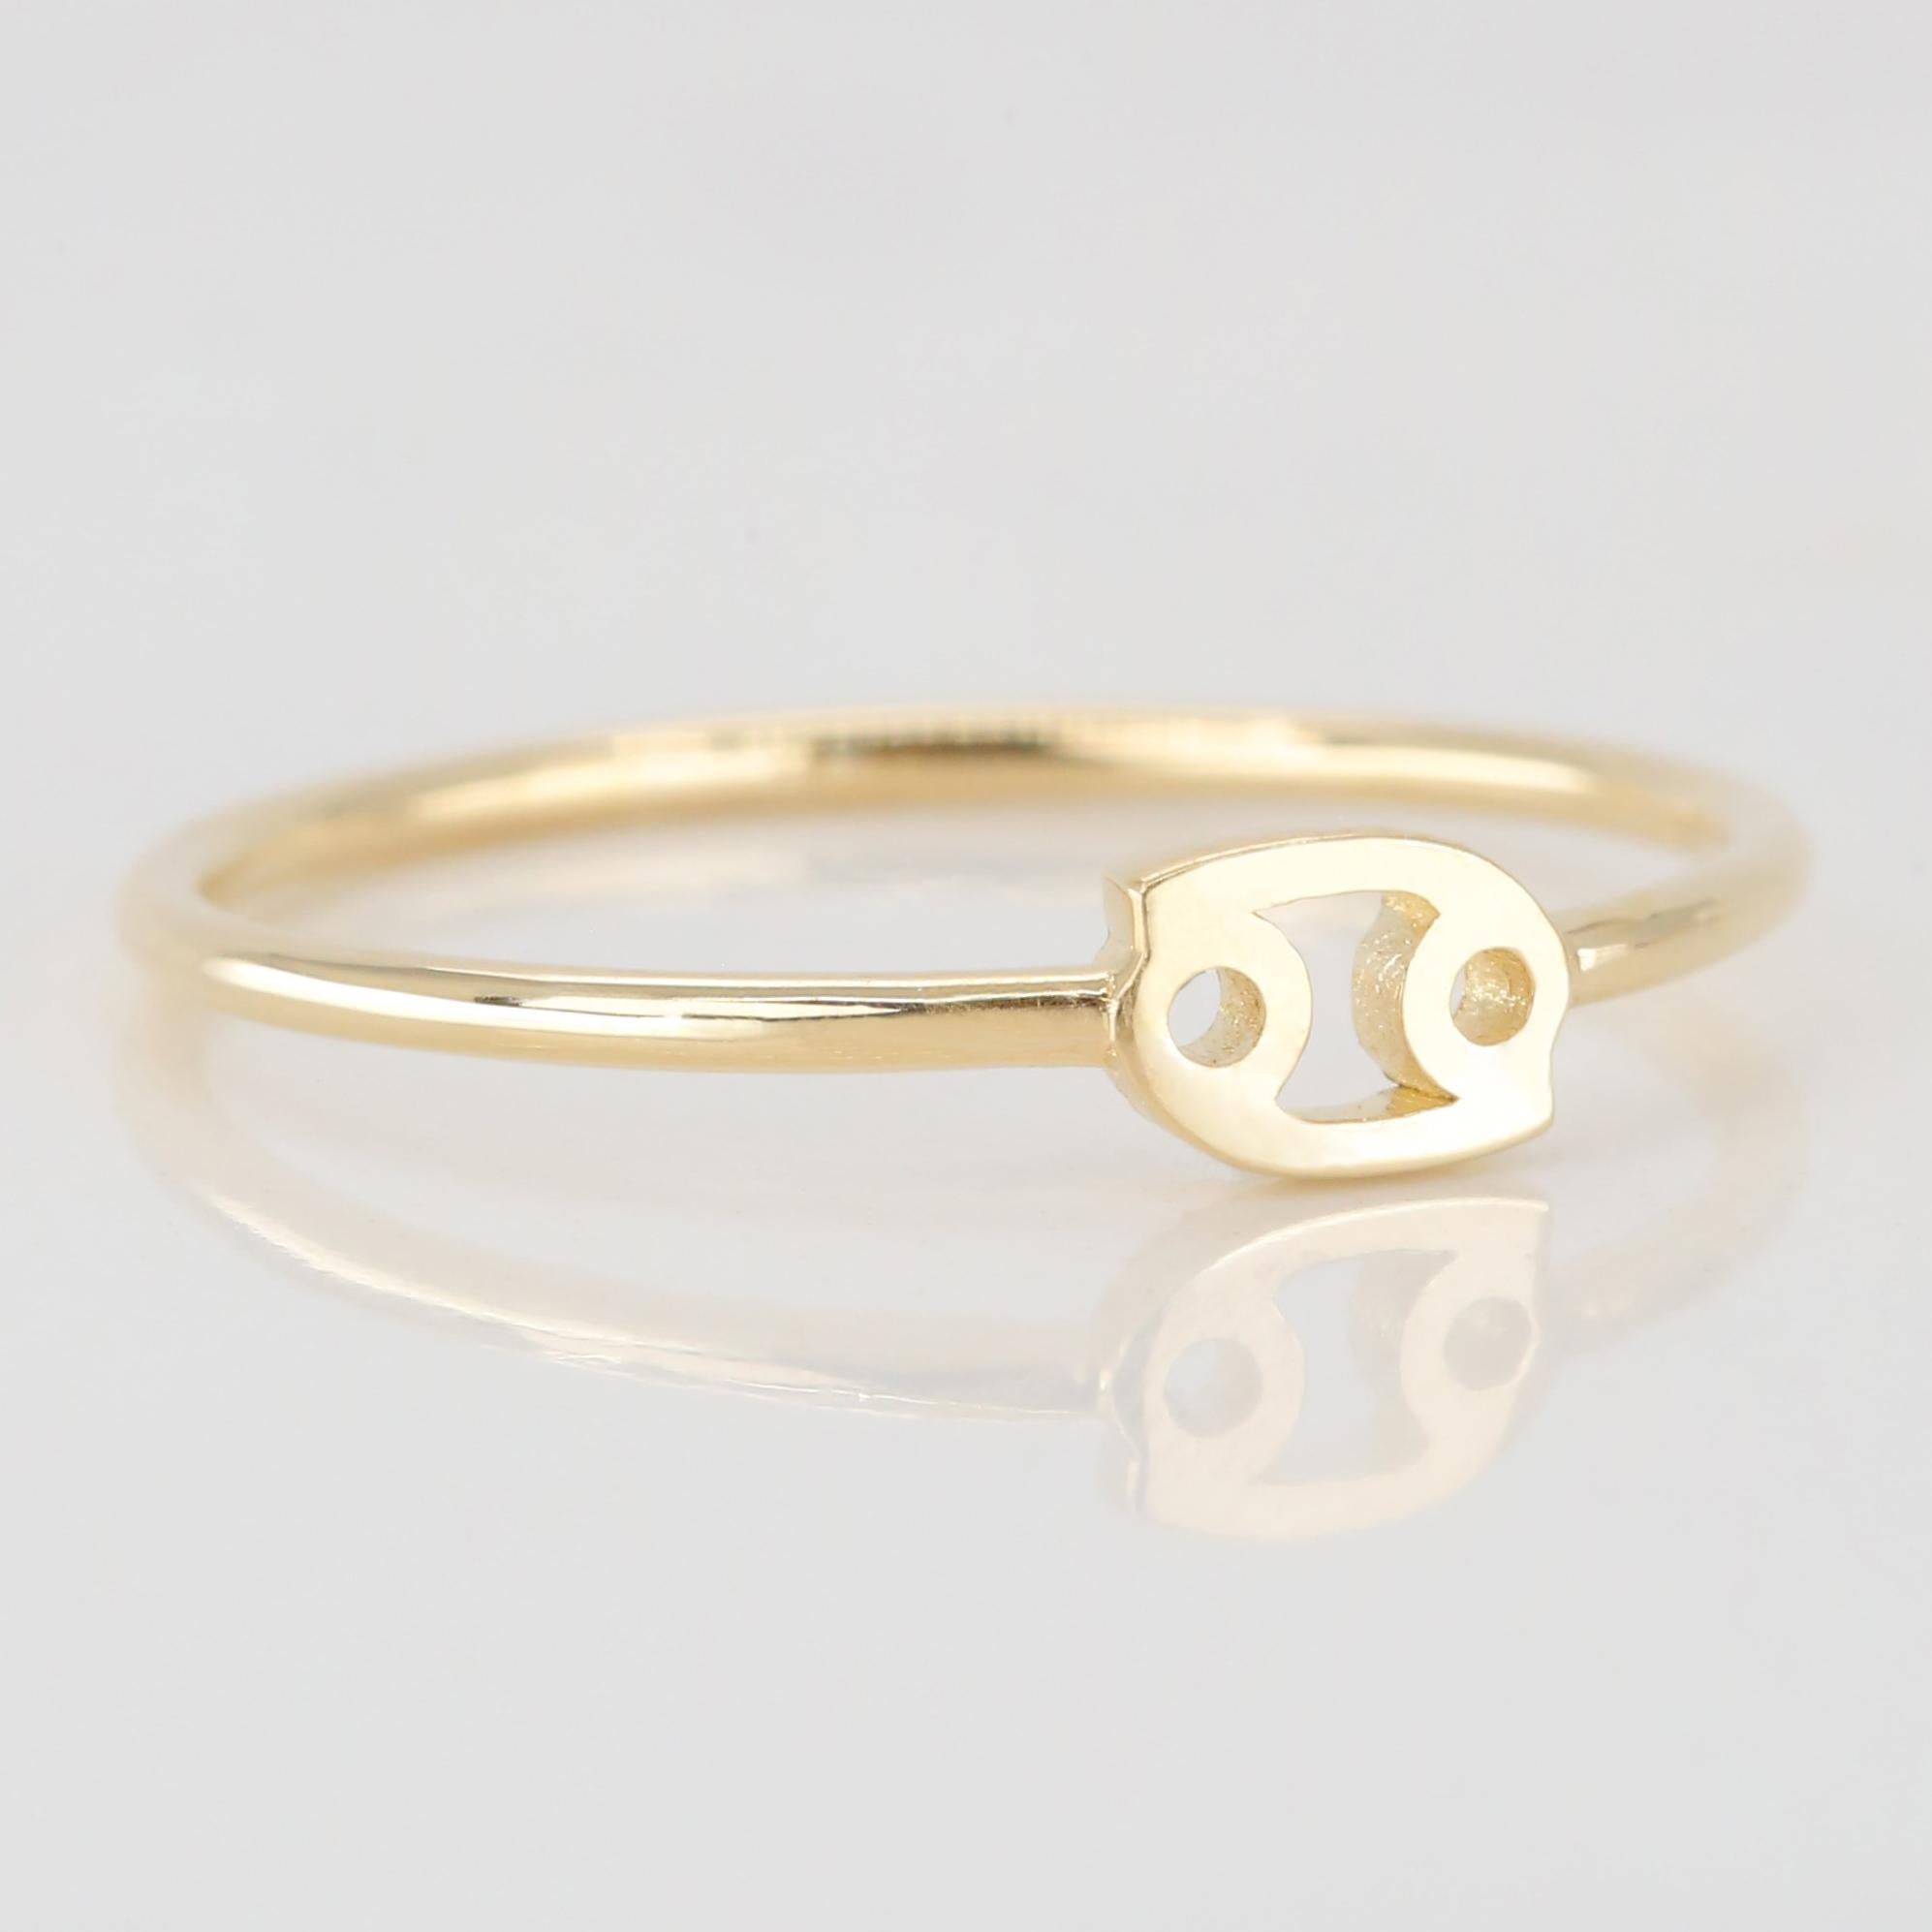 For Sale:  14K Gold Cancer Zodiac Ring, Cancer Sign Zodiac Ring 3